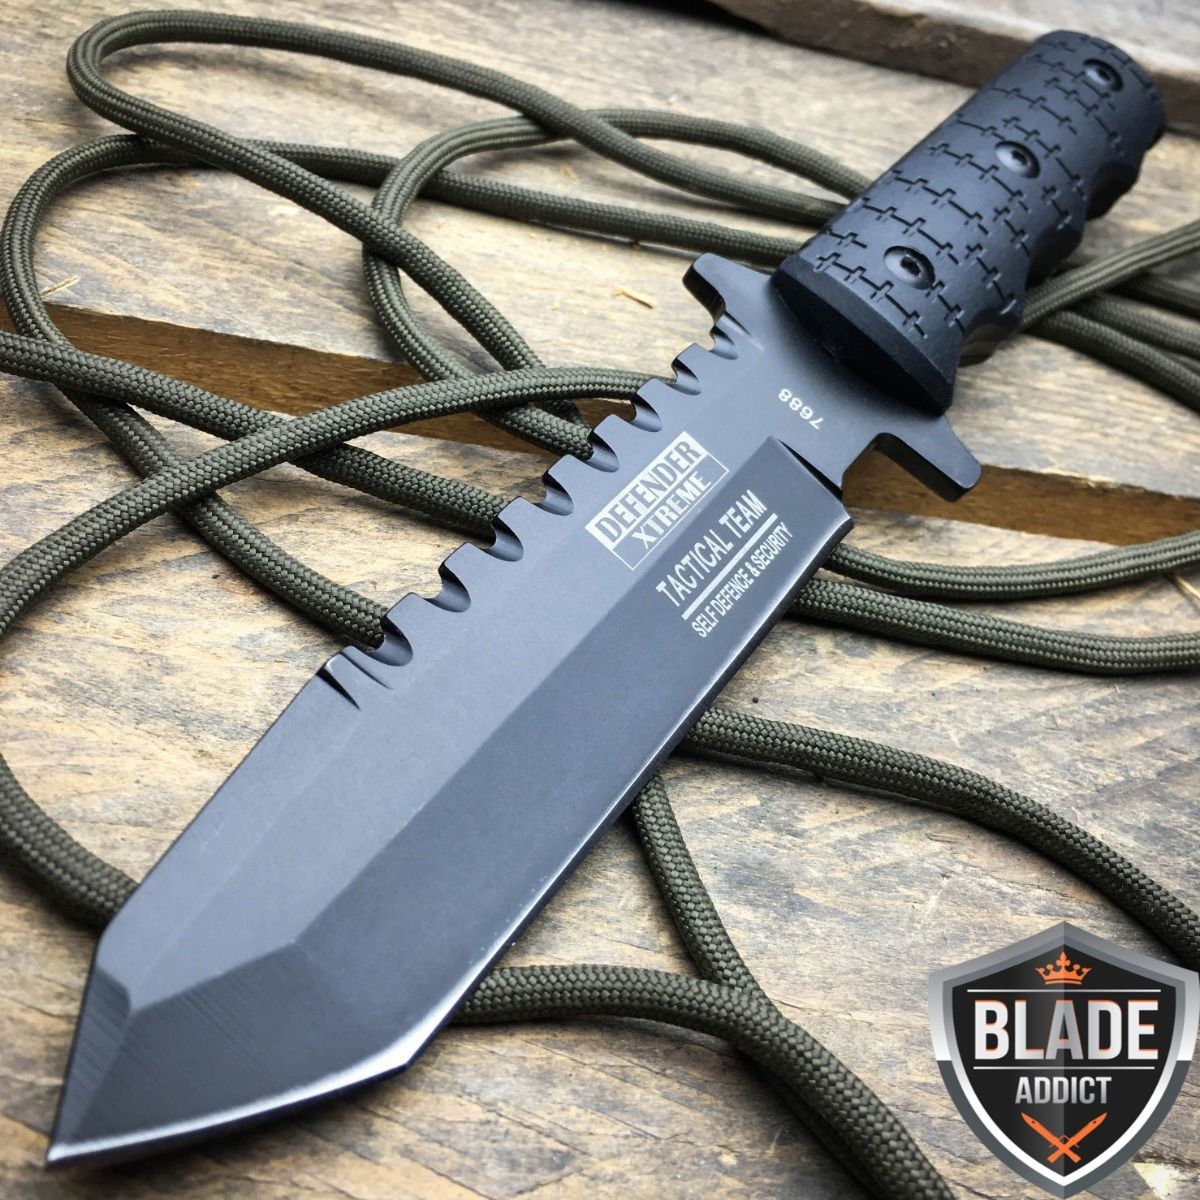 9″ Full Tang Tactical Hunting Survival Knife w/ Sheath Military Bowie Combat